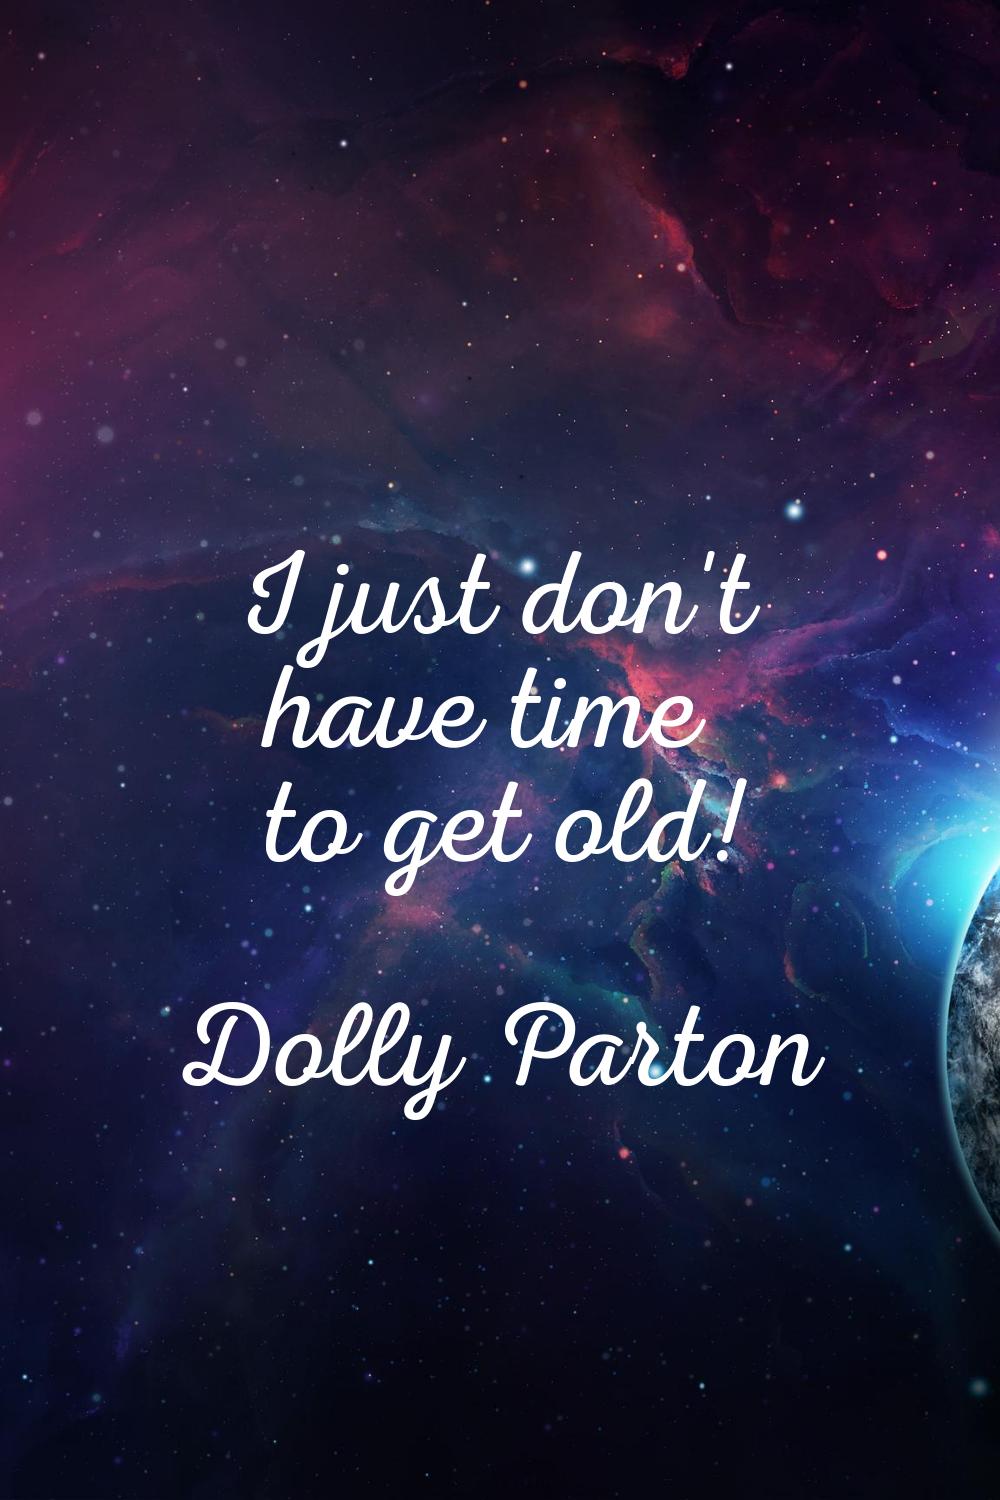 I just don't have time to get old!